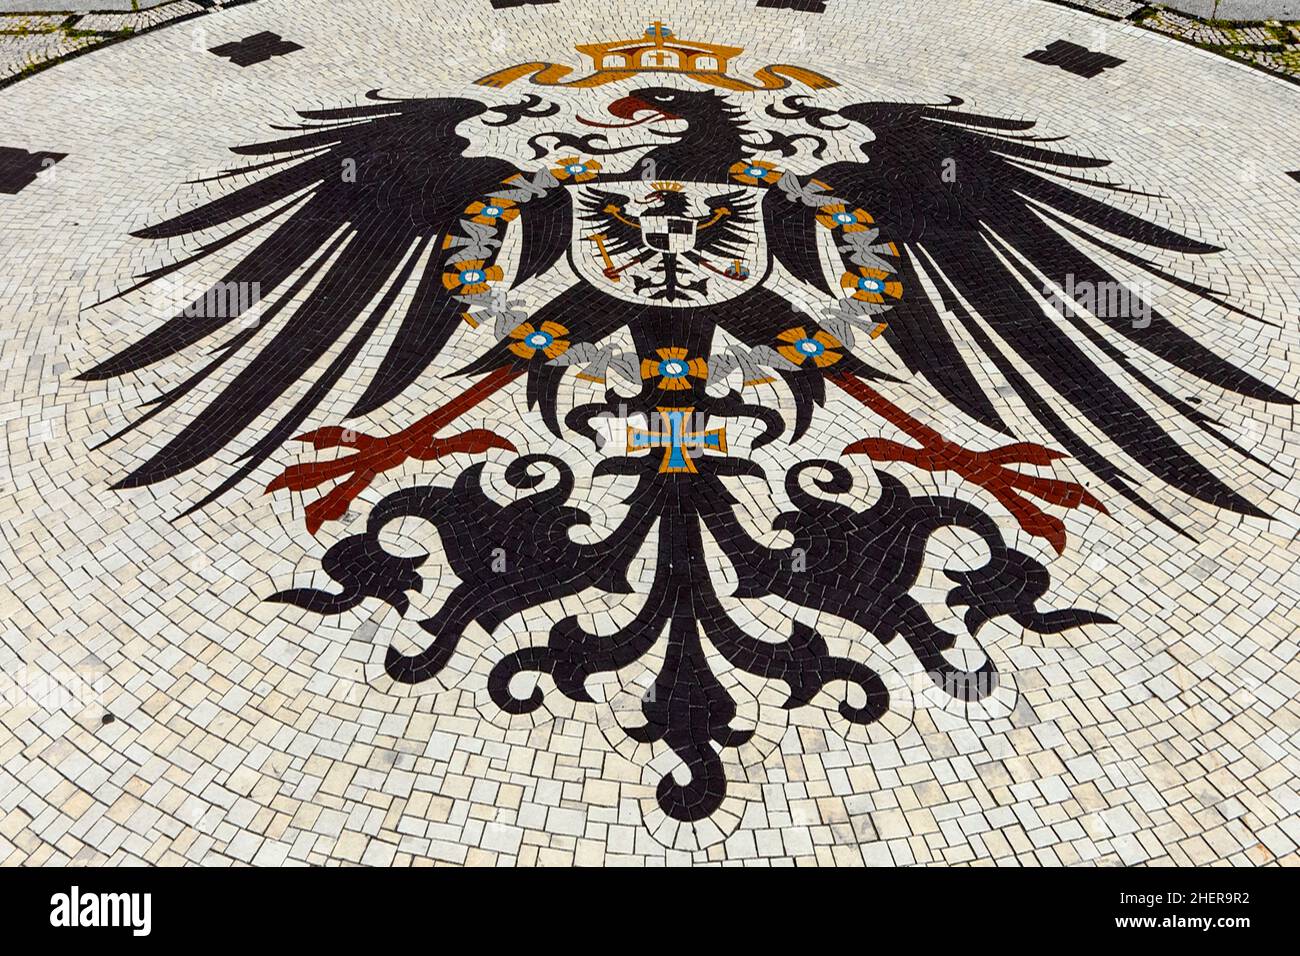 Mosaic depicting the Reichsadler (Imperial Eagle) in front of Neues Rathaus (New City Hall) at Schlossplatz in Wiesbaden, Germany Stock Photo